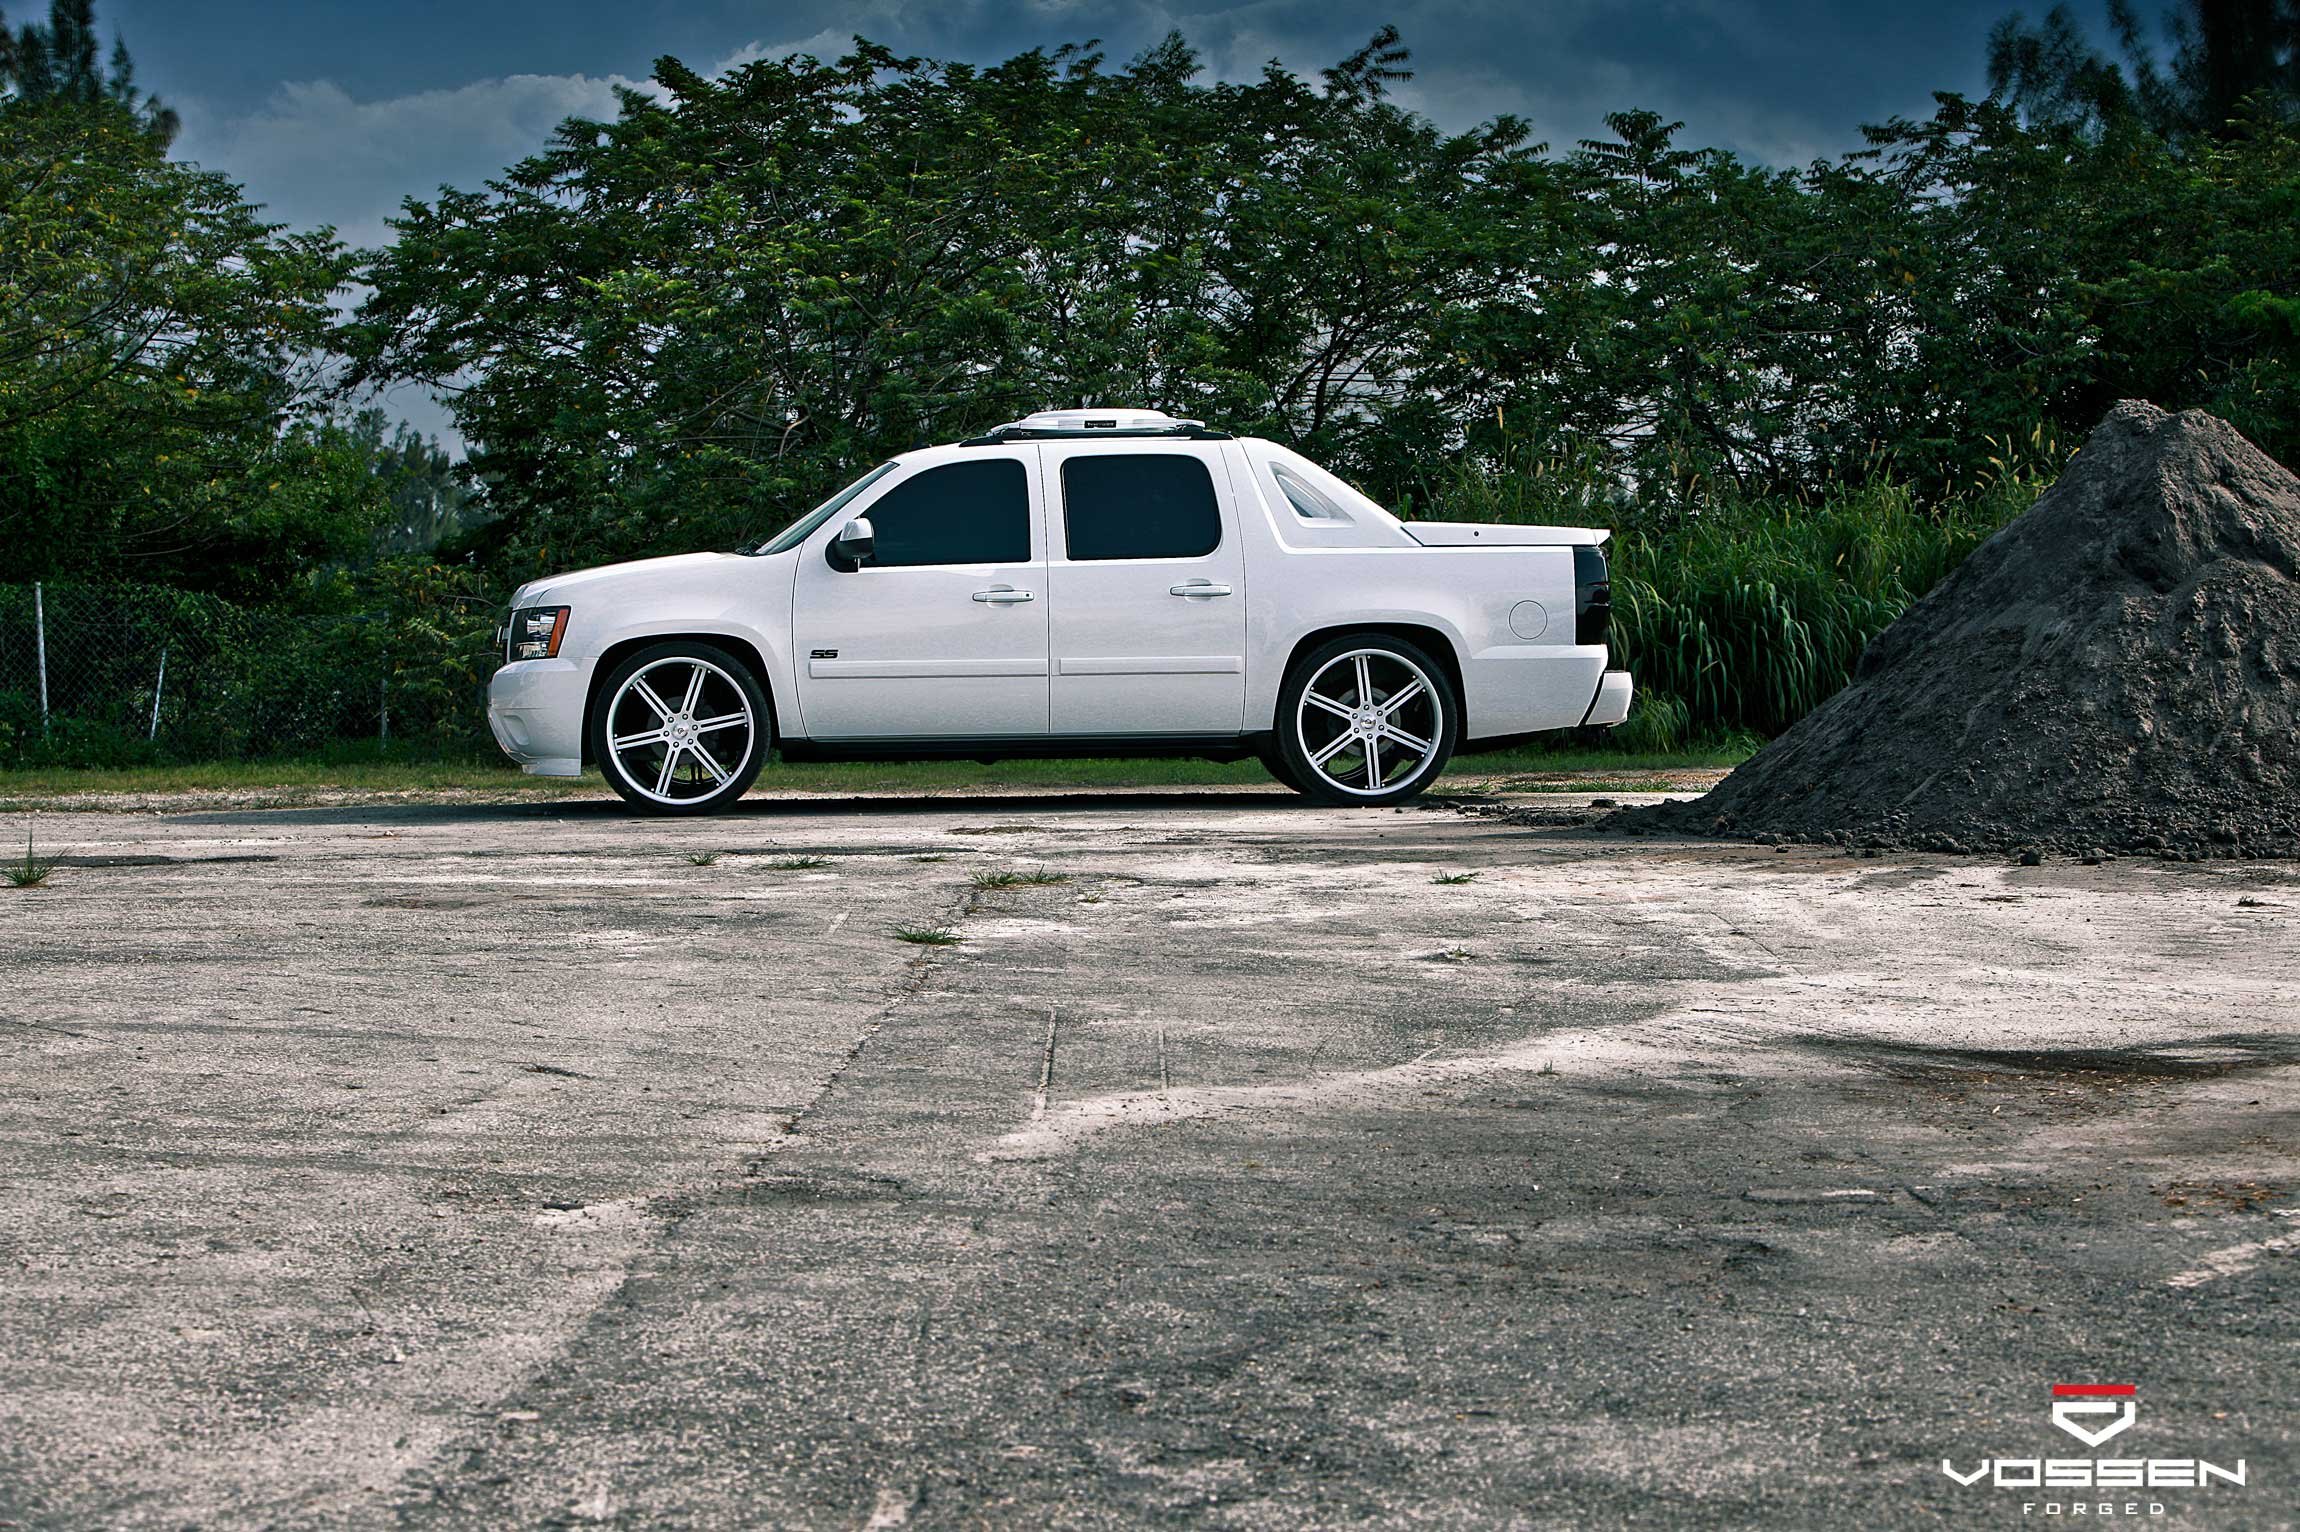 White Chevy Avalanche with Chrome Forged Vossen Rims - Photo by Vossen